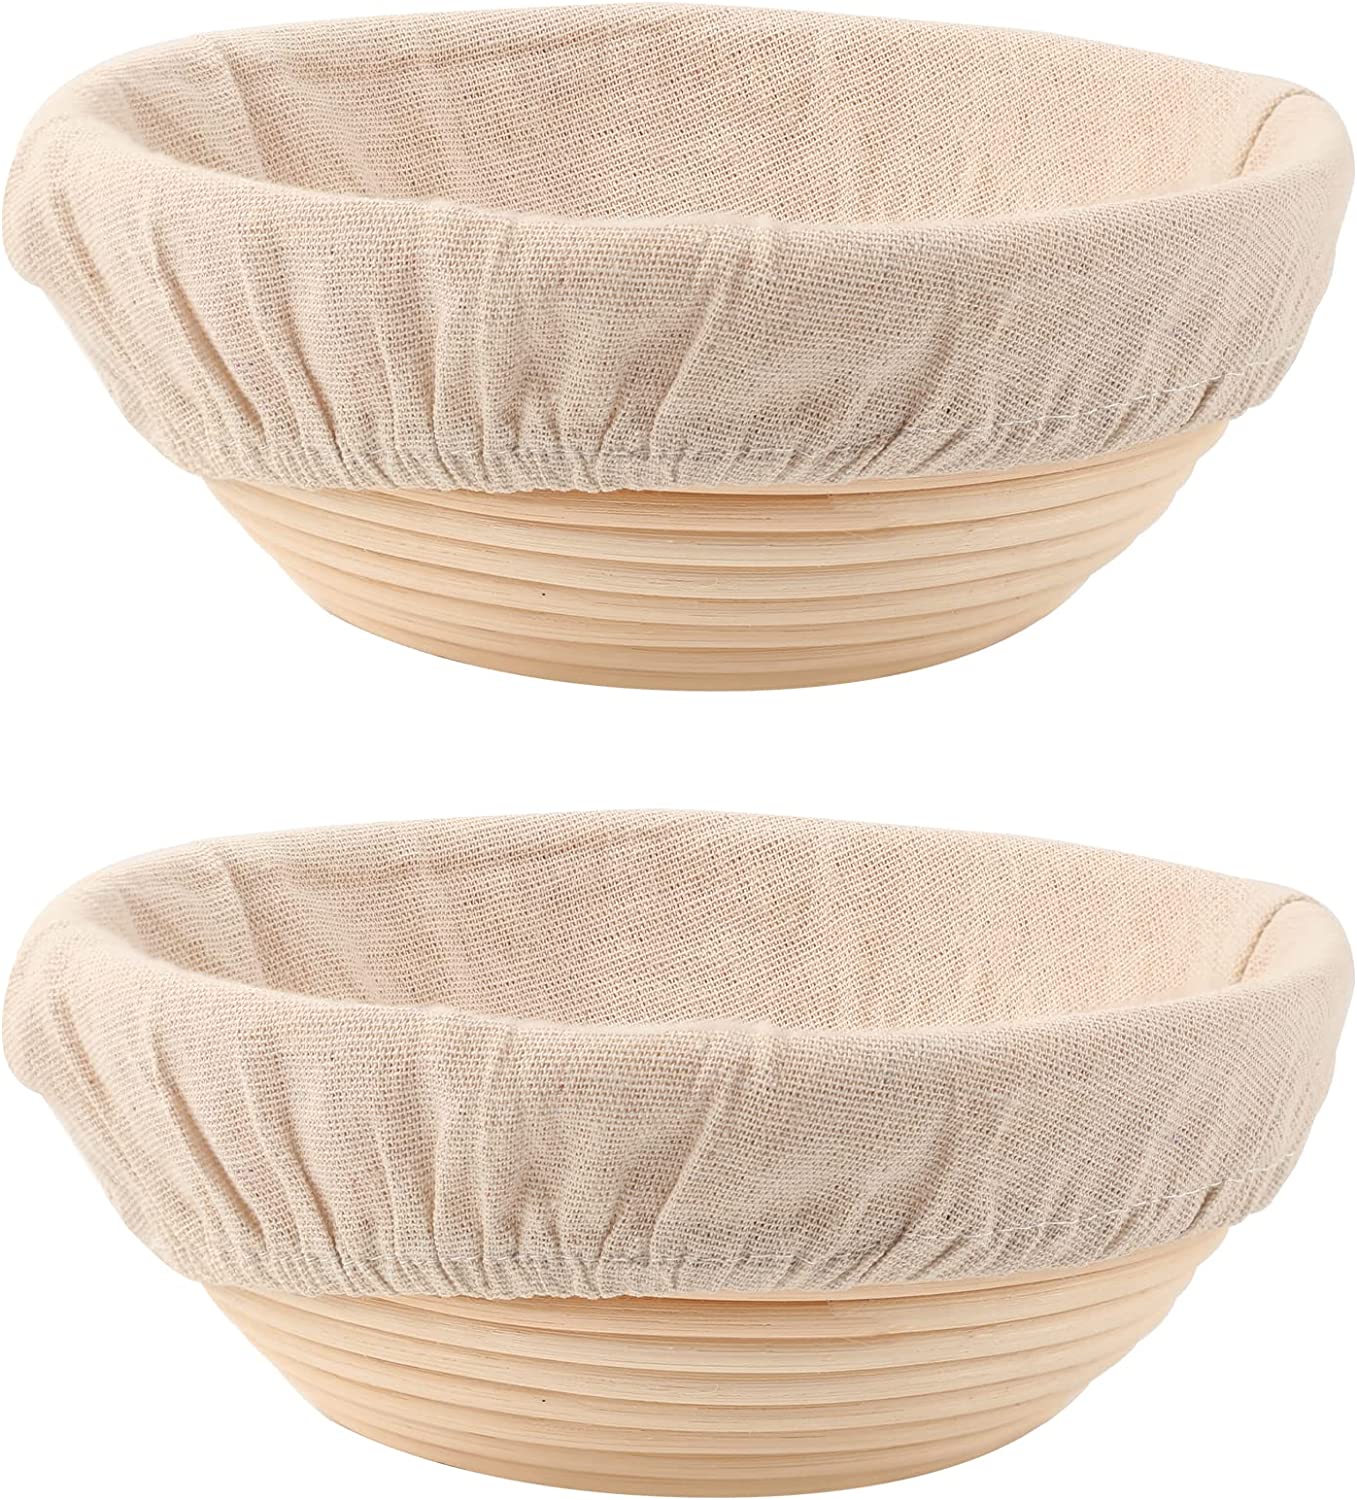 DOYOLLA Food Safe & Chemical Free Bread Proofing Baskets, 2-Pack